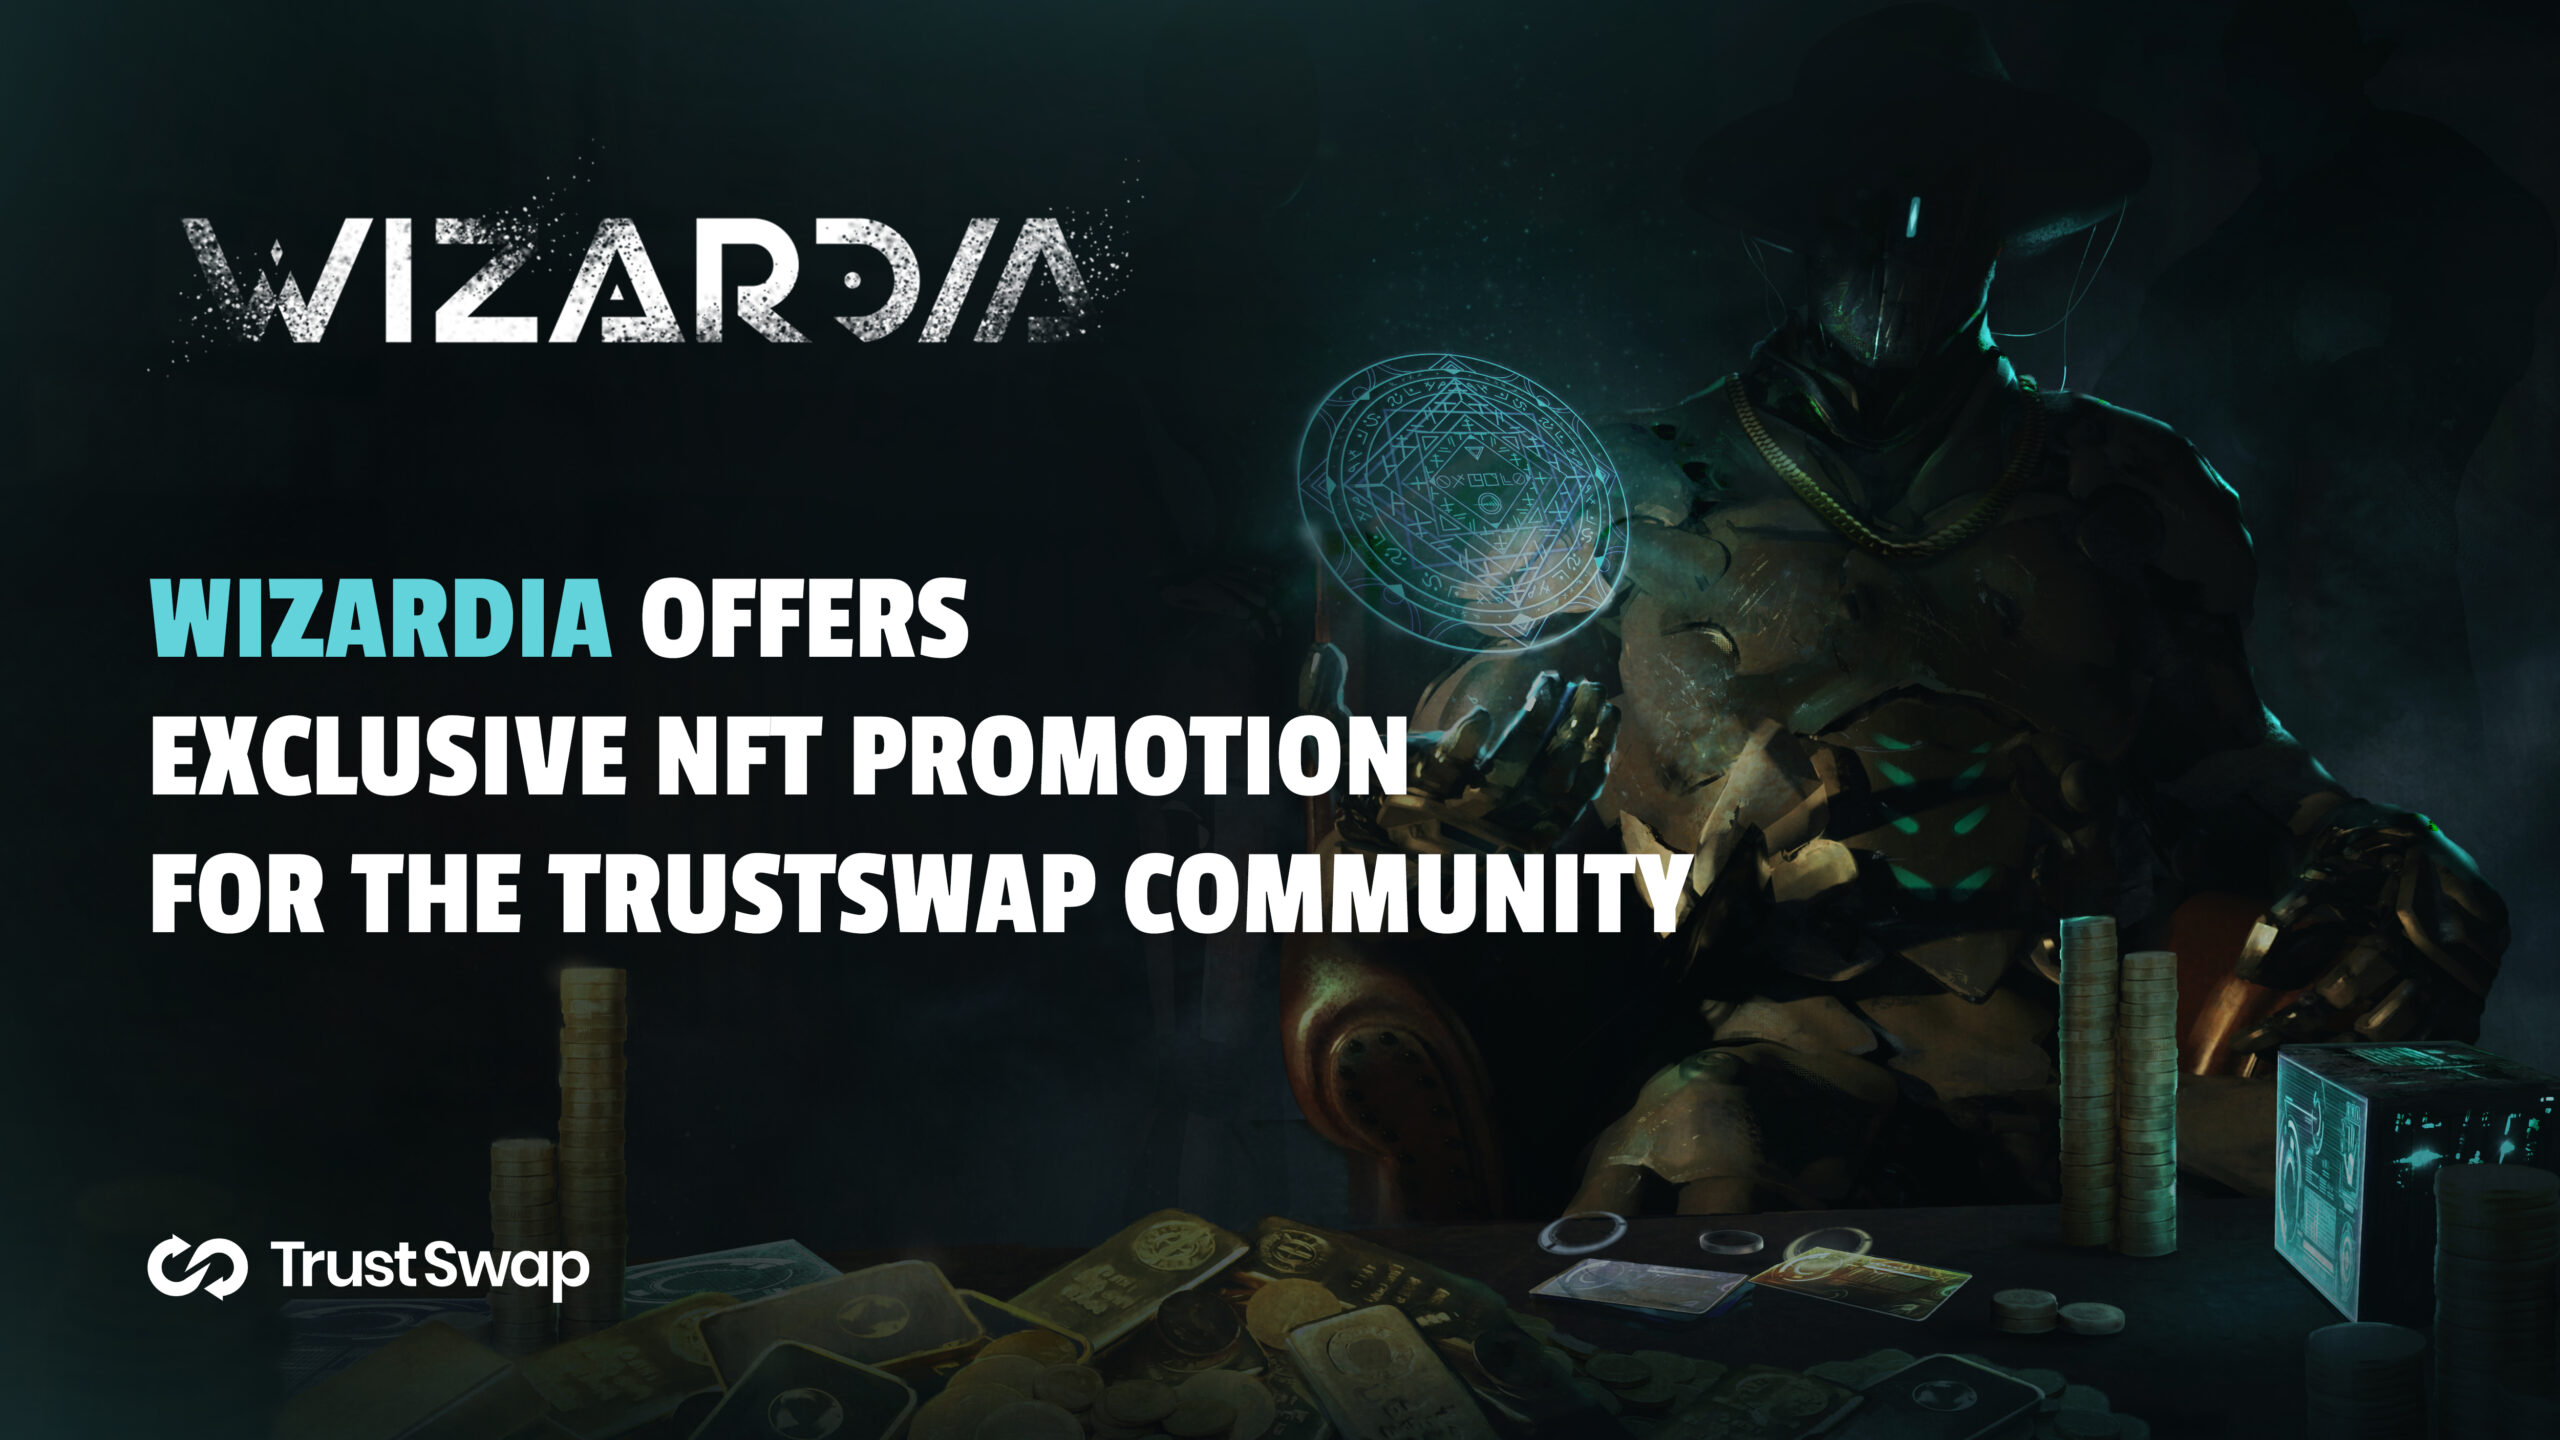 Wizardia Offers Exclusive NFT Promotion for the TrustSwap Community